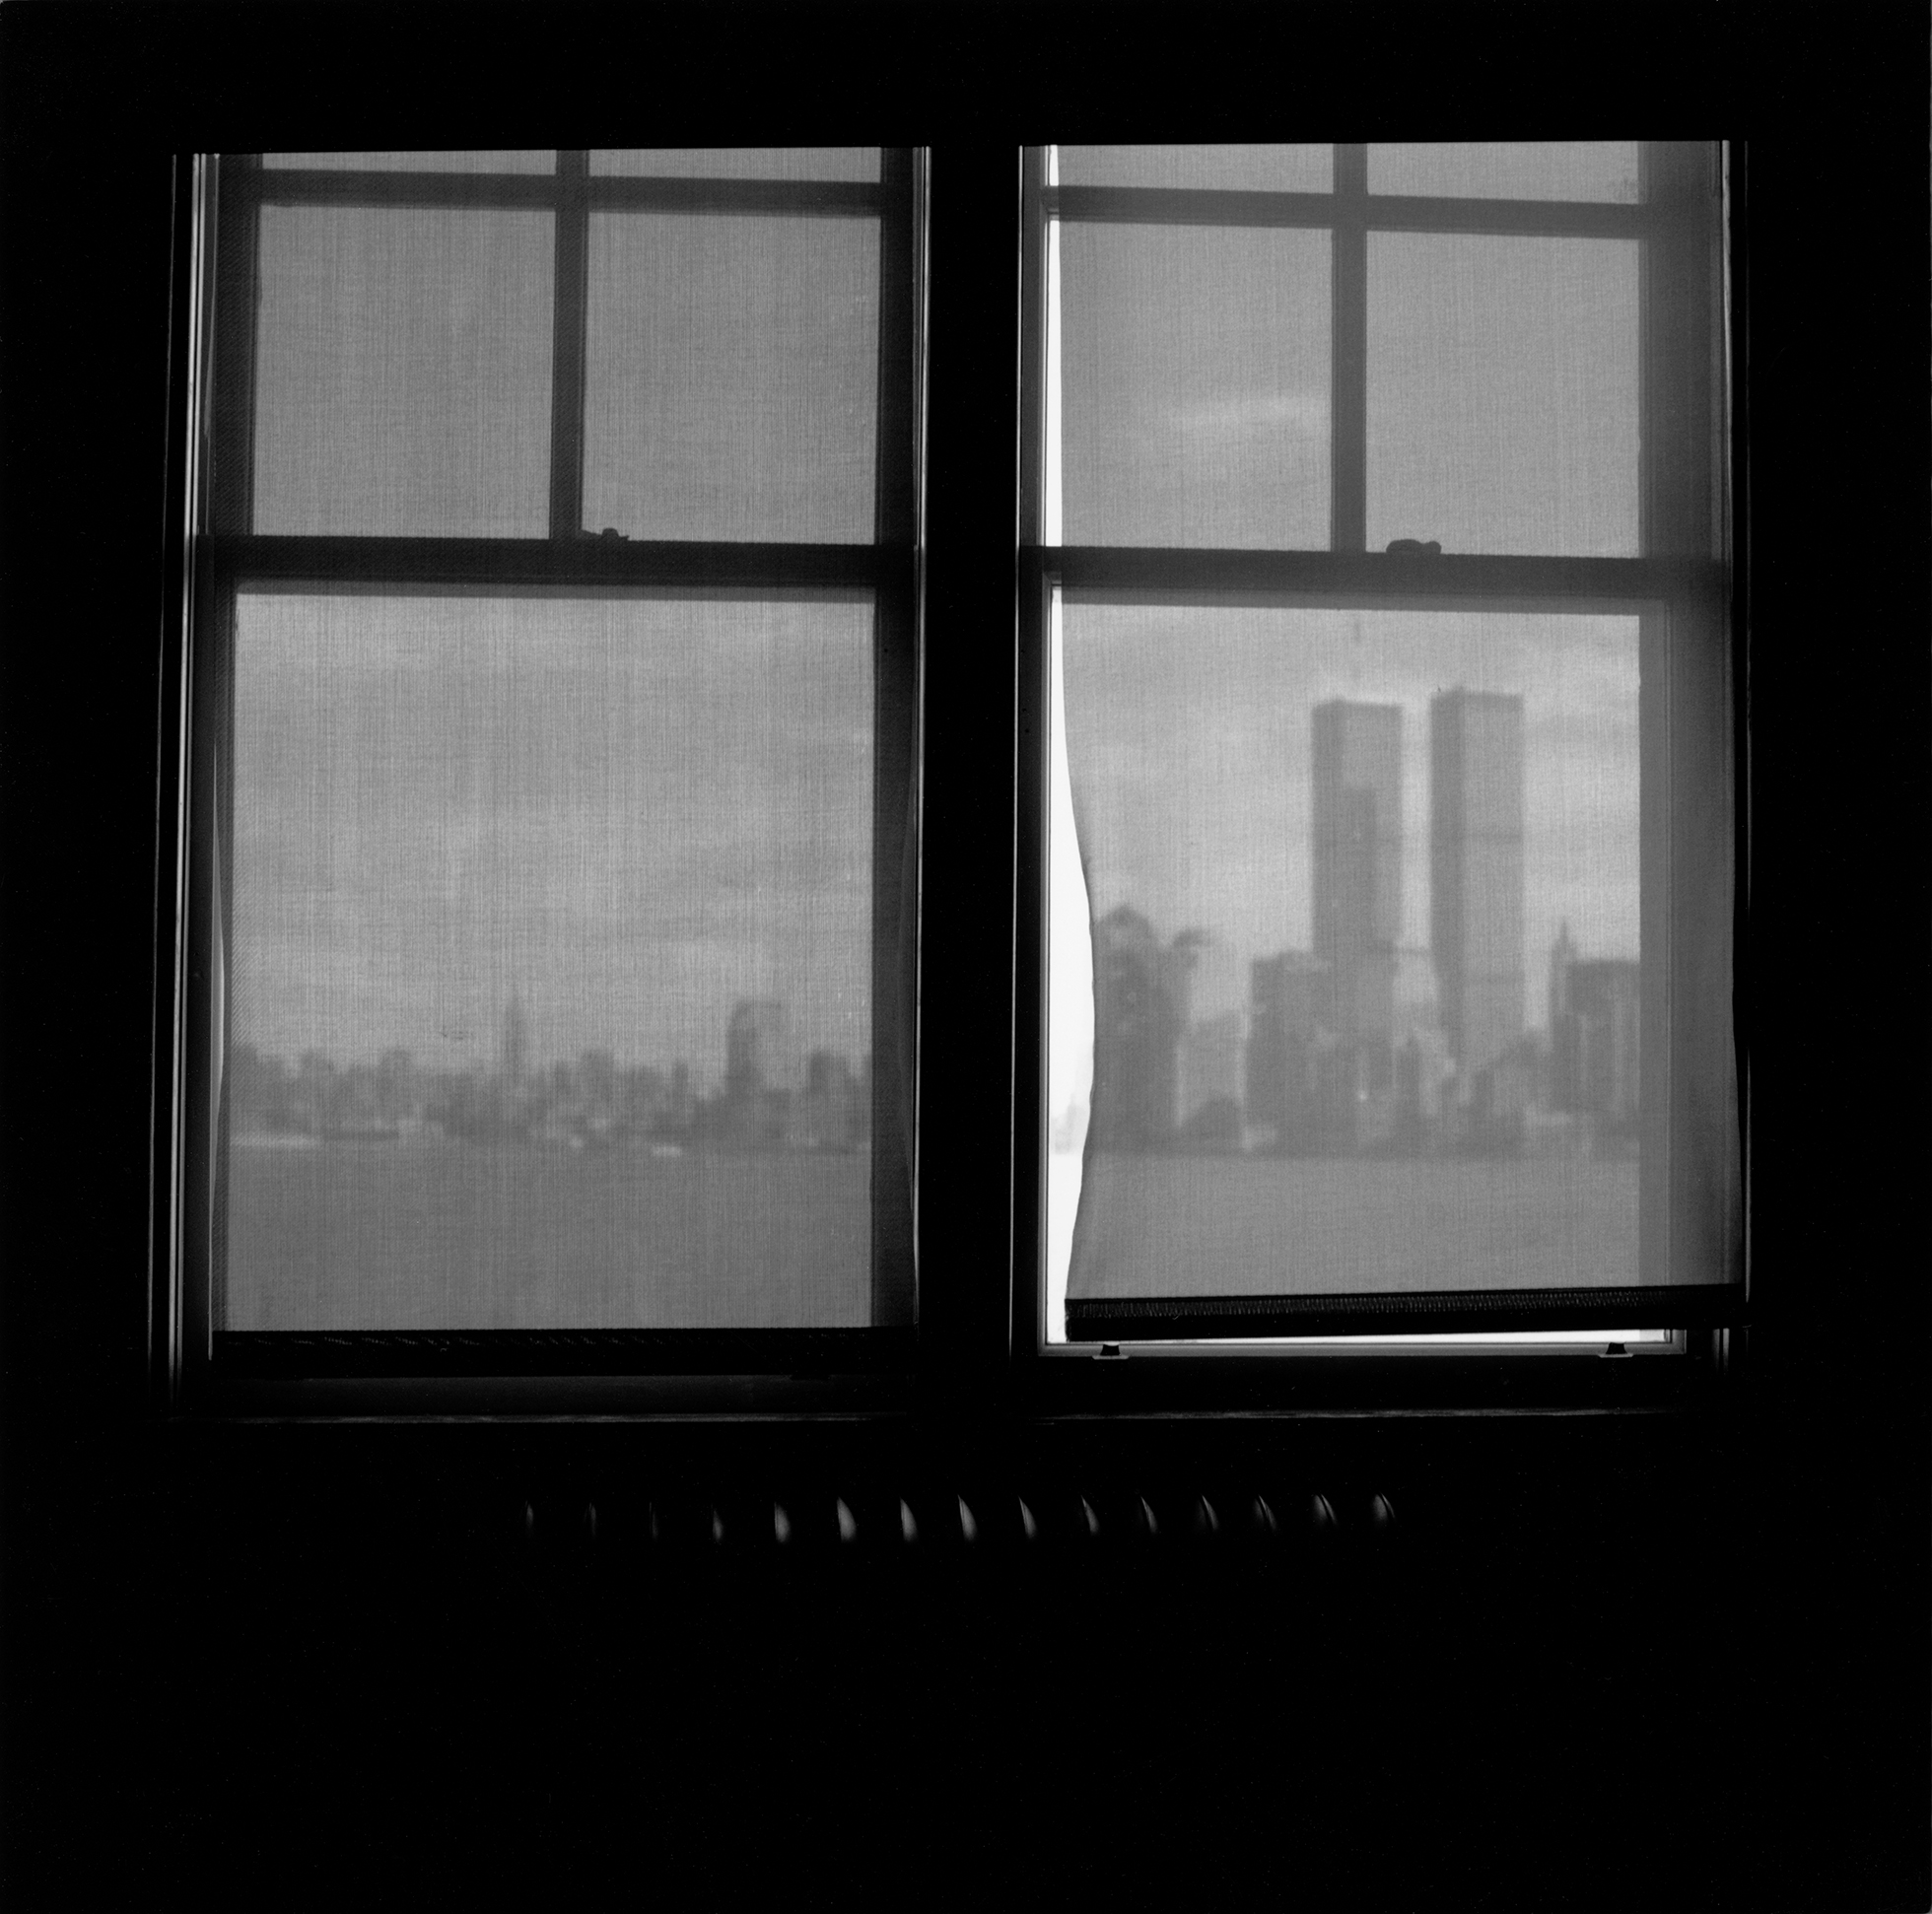 The New York skyline seen through twin windows covered with sheer shades with the Twin Towers visible in the right window.